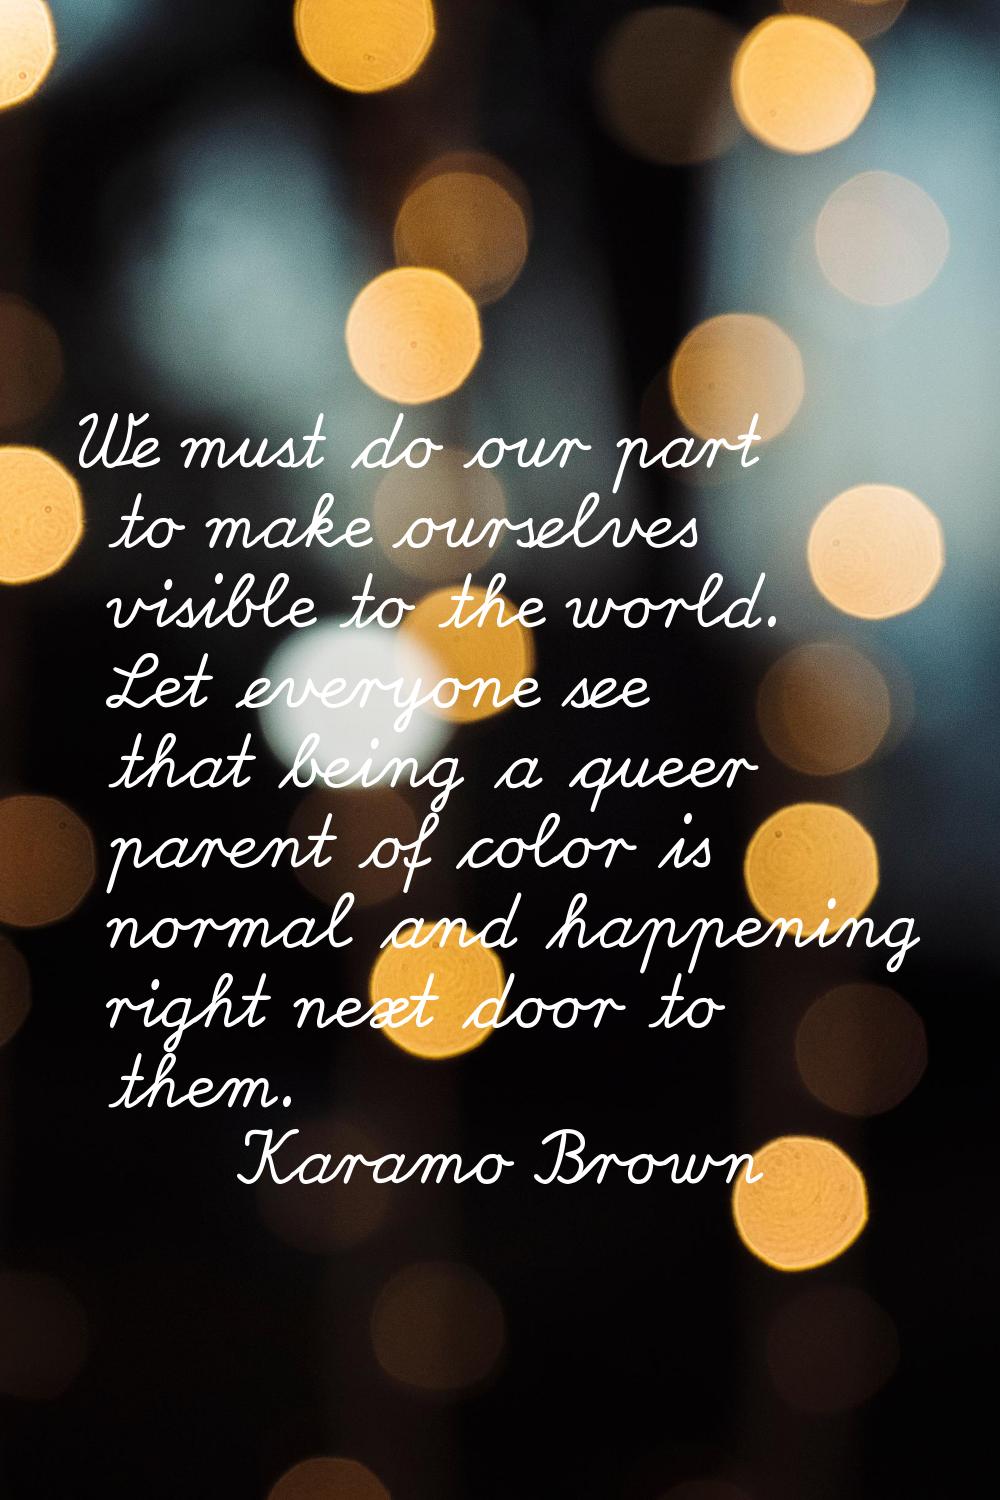 We must do our part to make ourselves visible to the world. Let everyone see that being a queer par